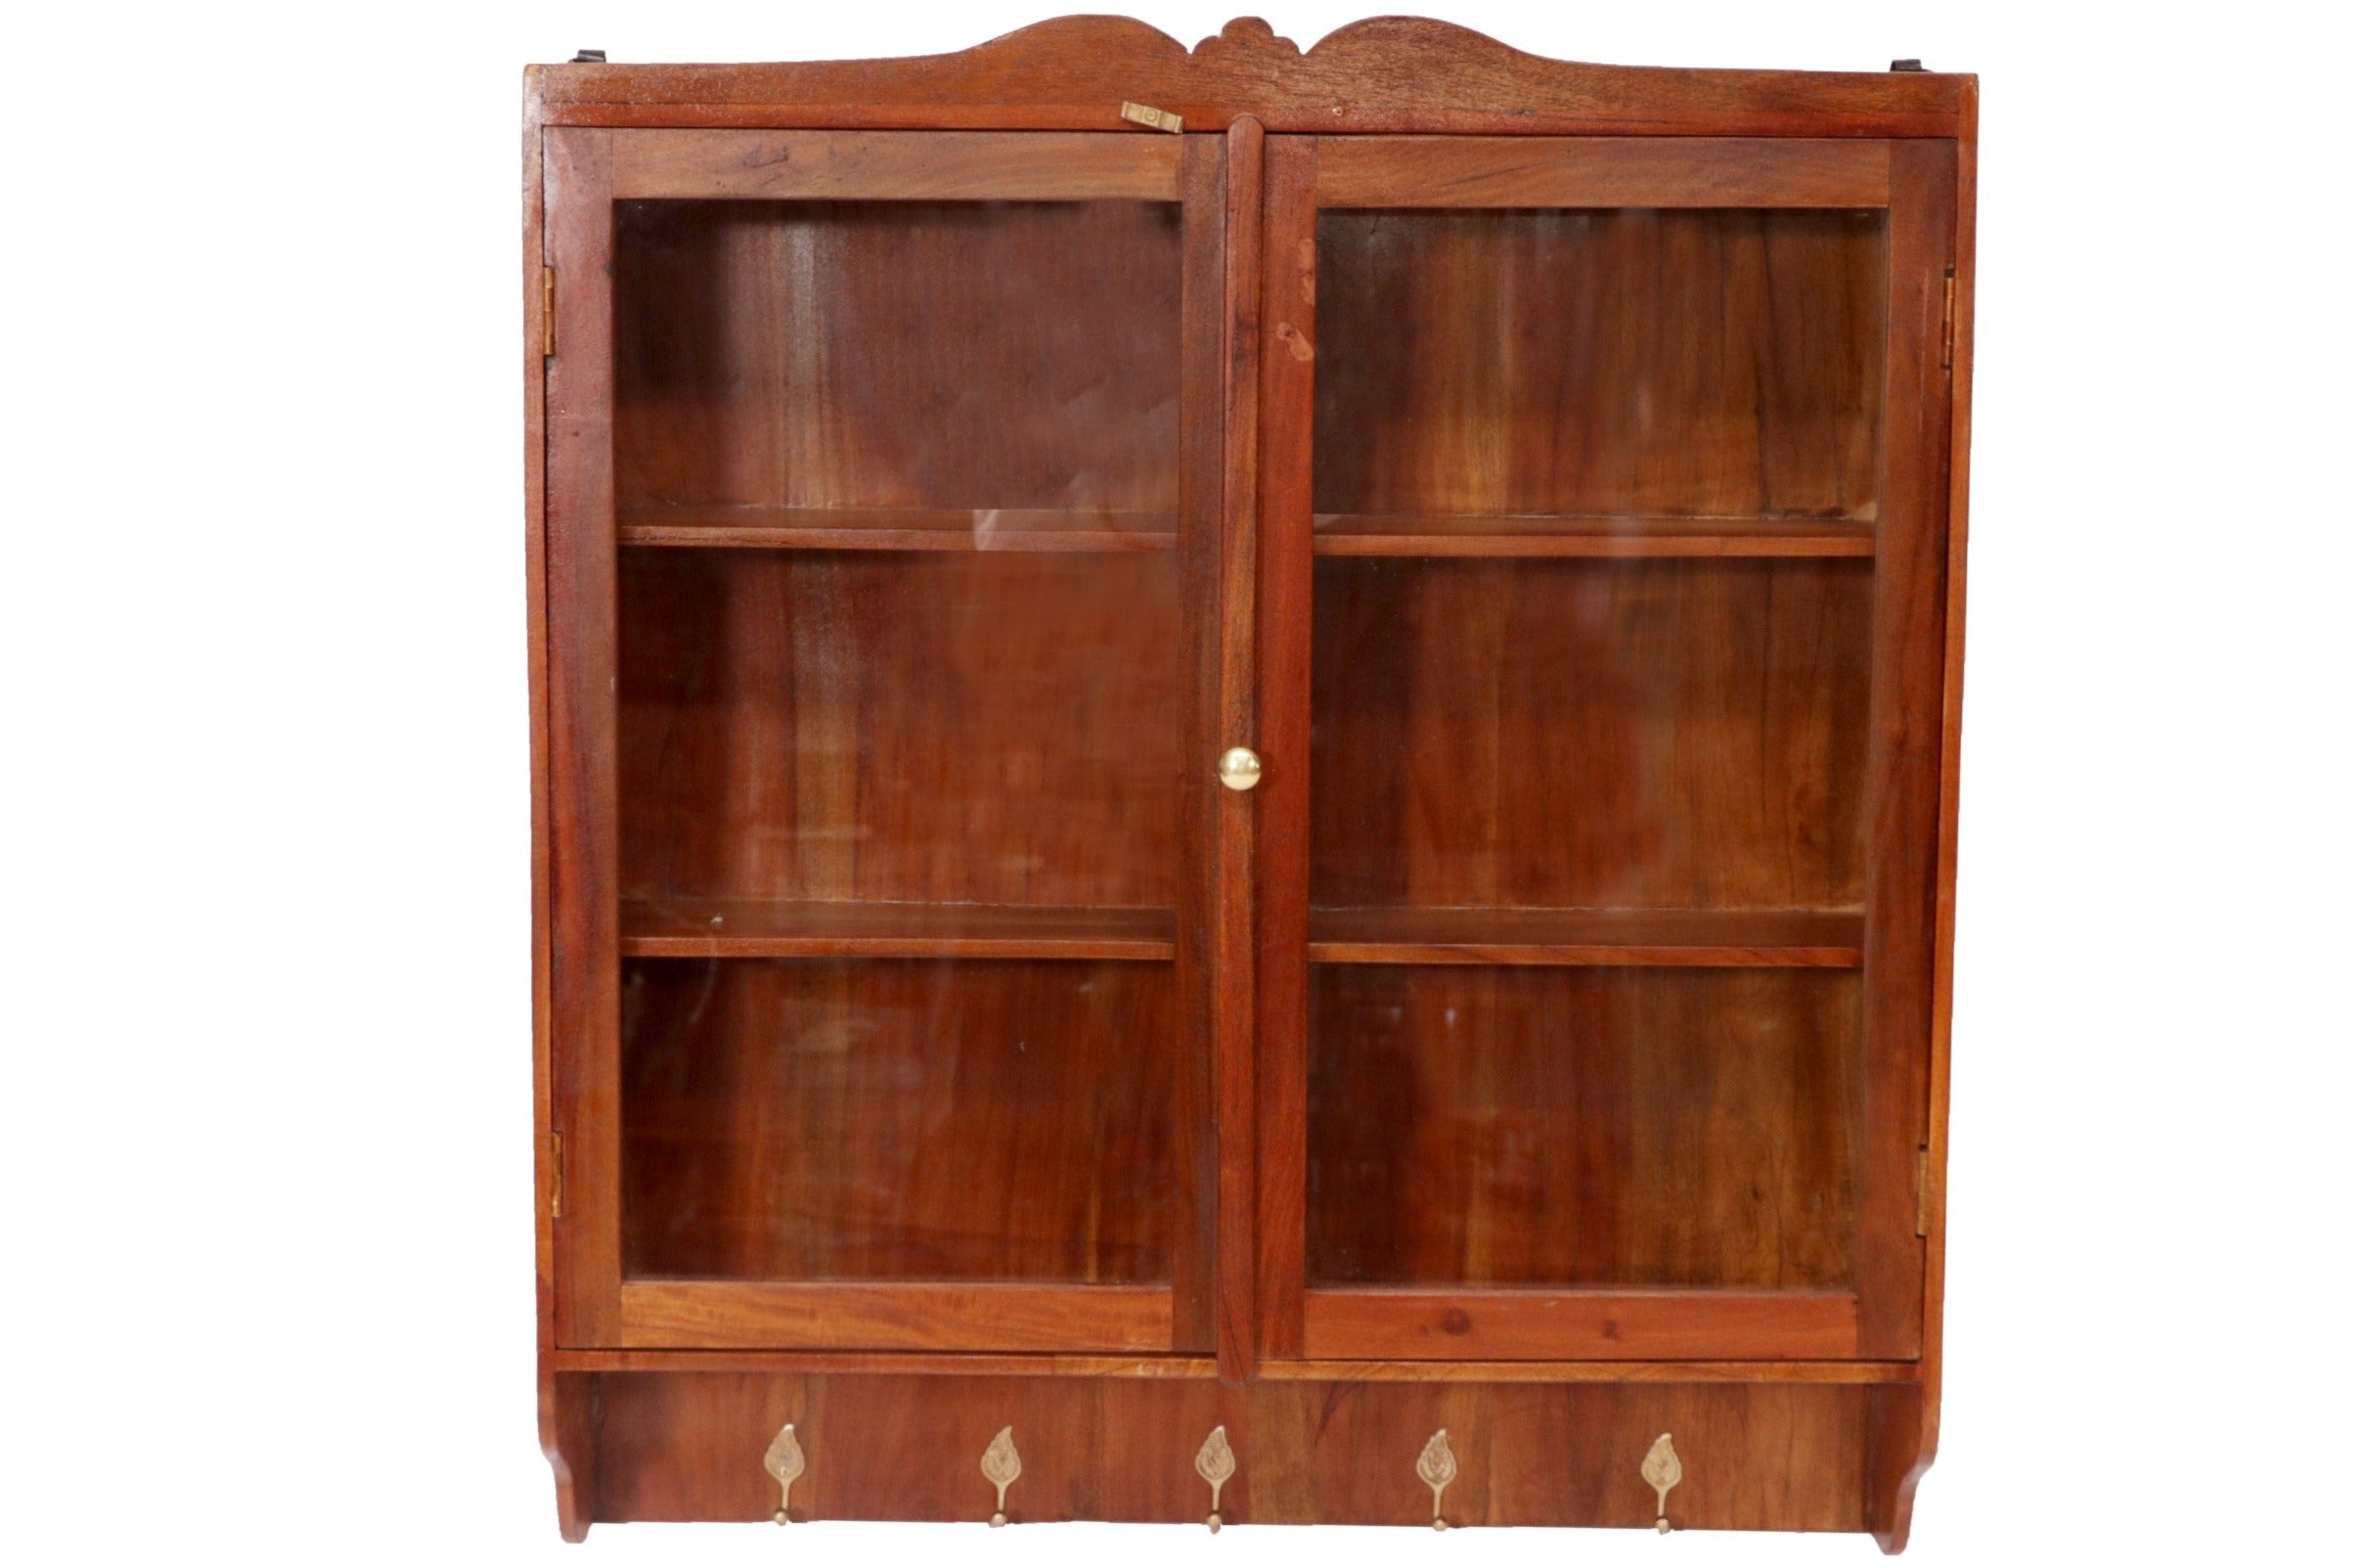 32 x 7 x 36 Inch Long-Wide Hanging Wooden Cabinet Wall Cabinet